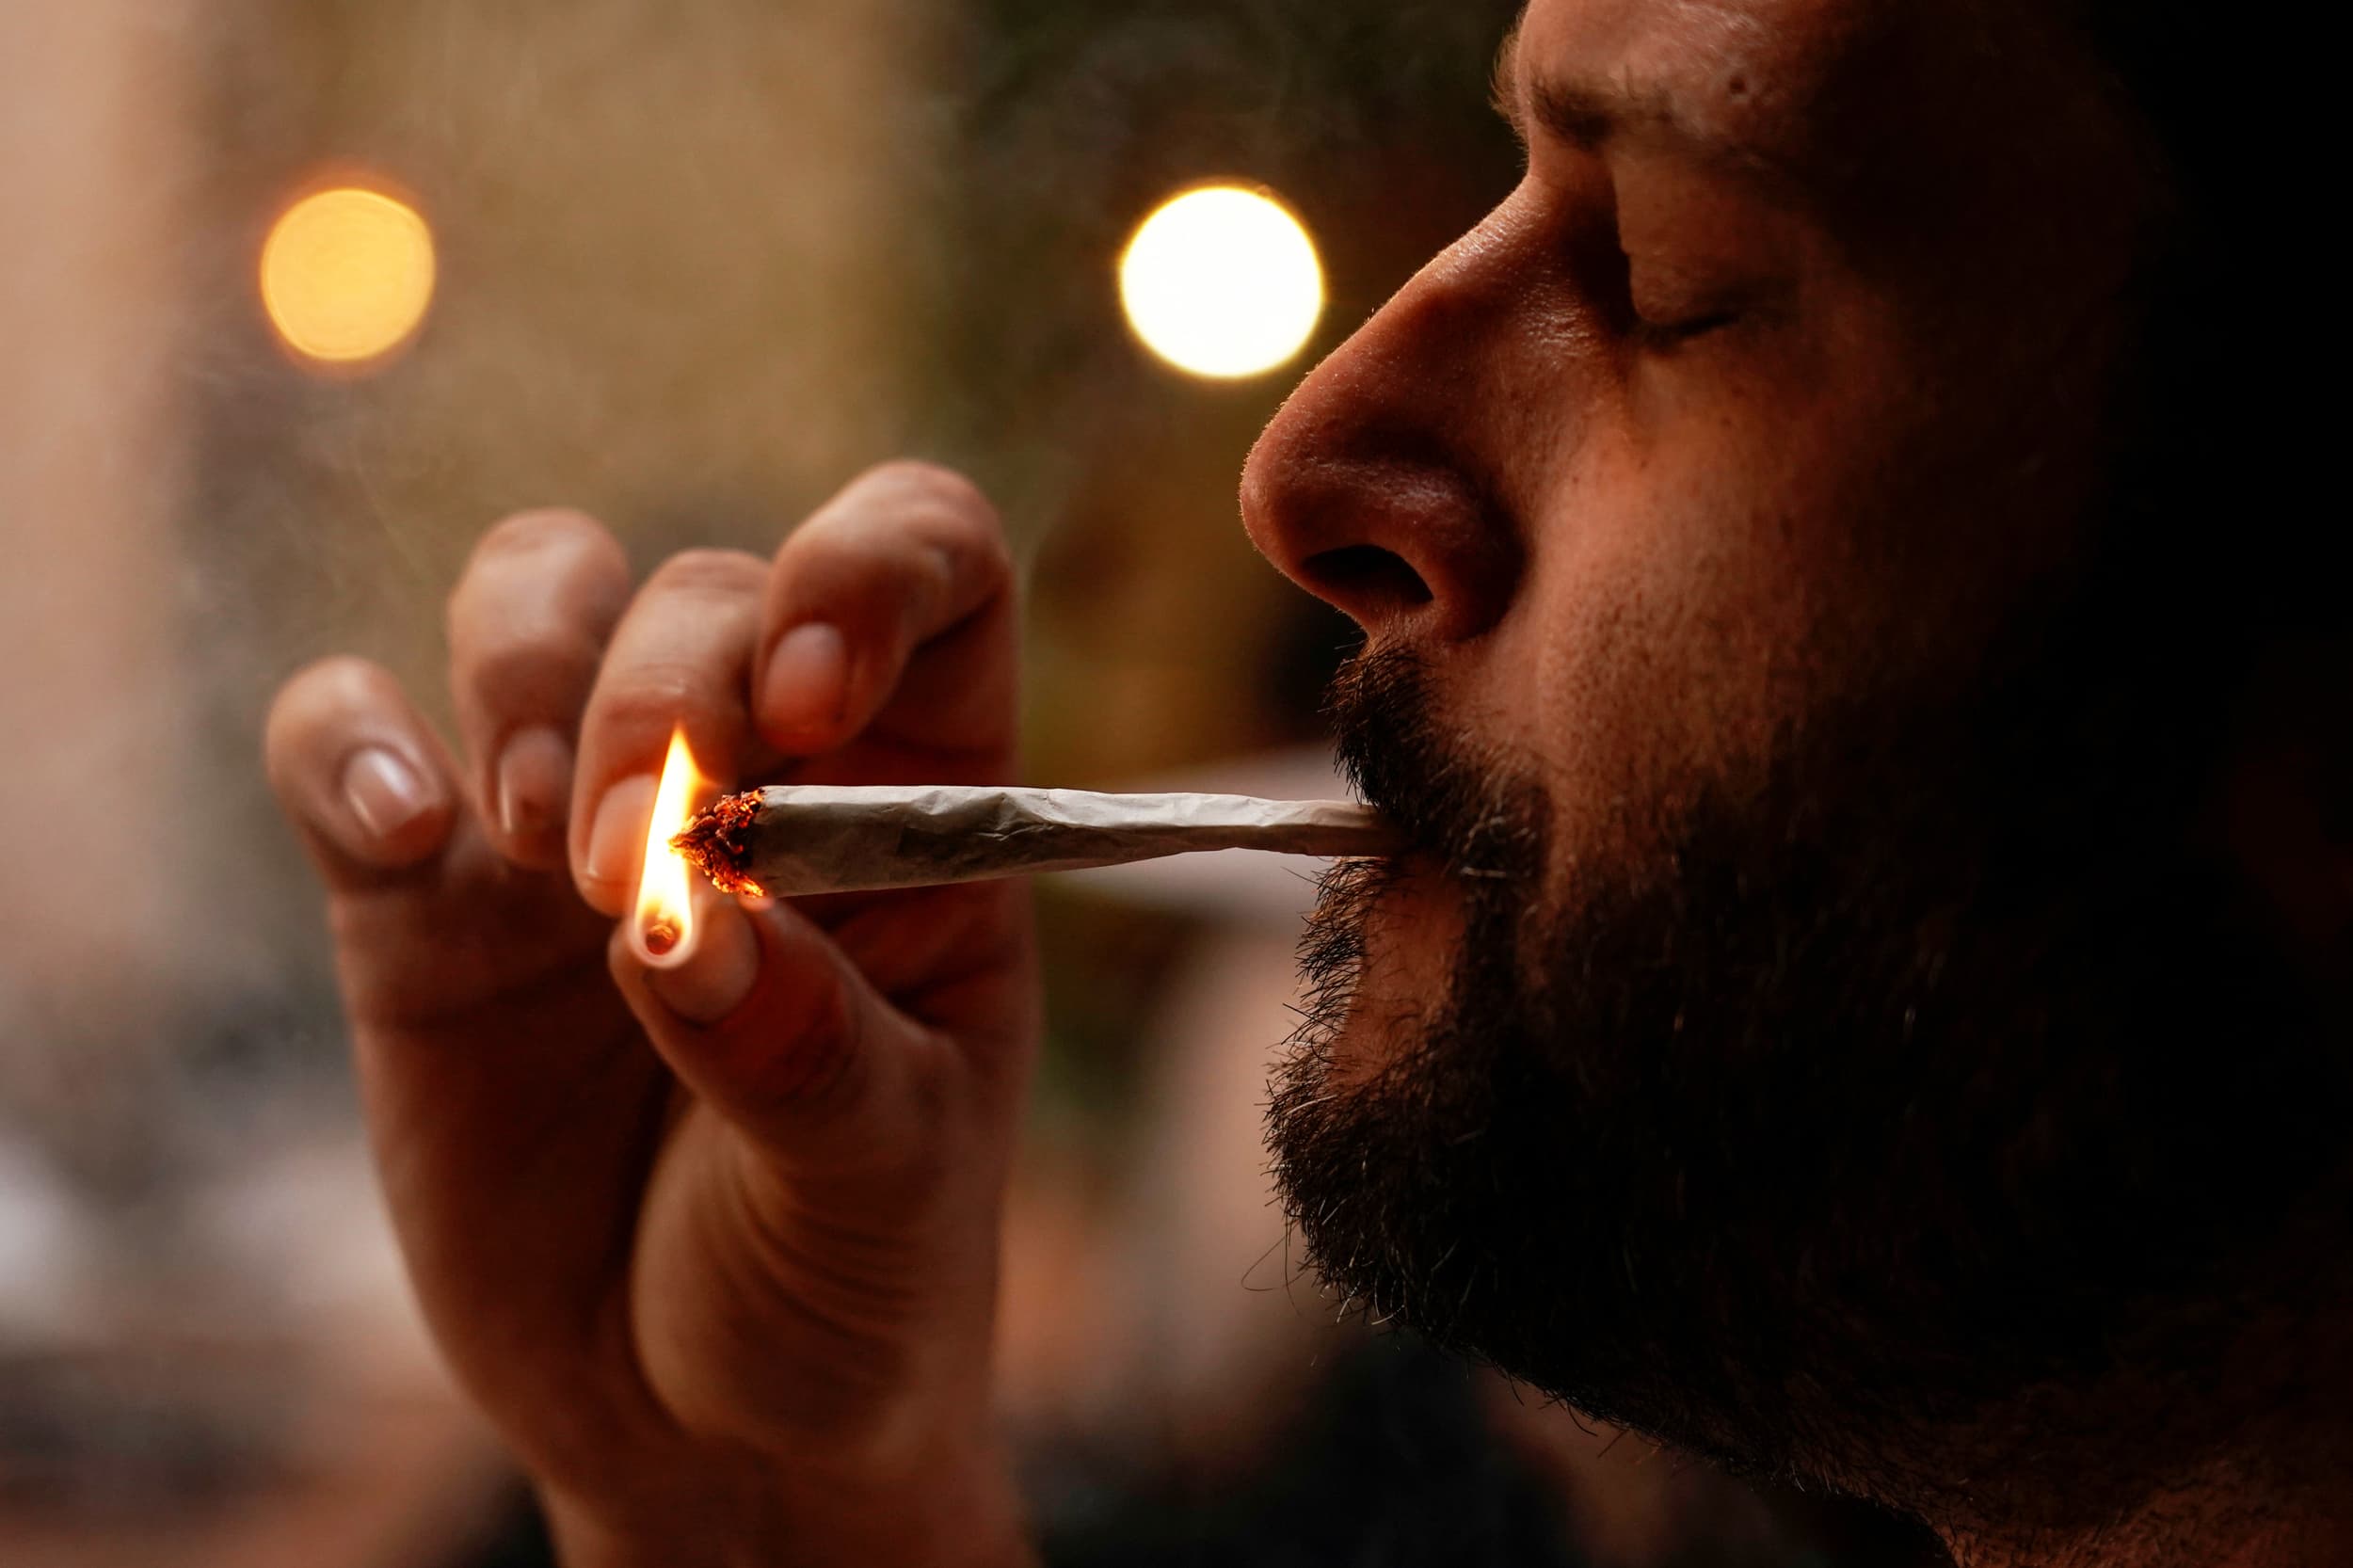 Virginia will get near legalizing leisure weed as different states eye hashish tax windfalls